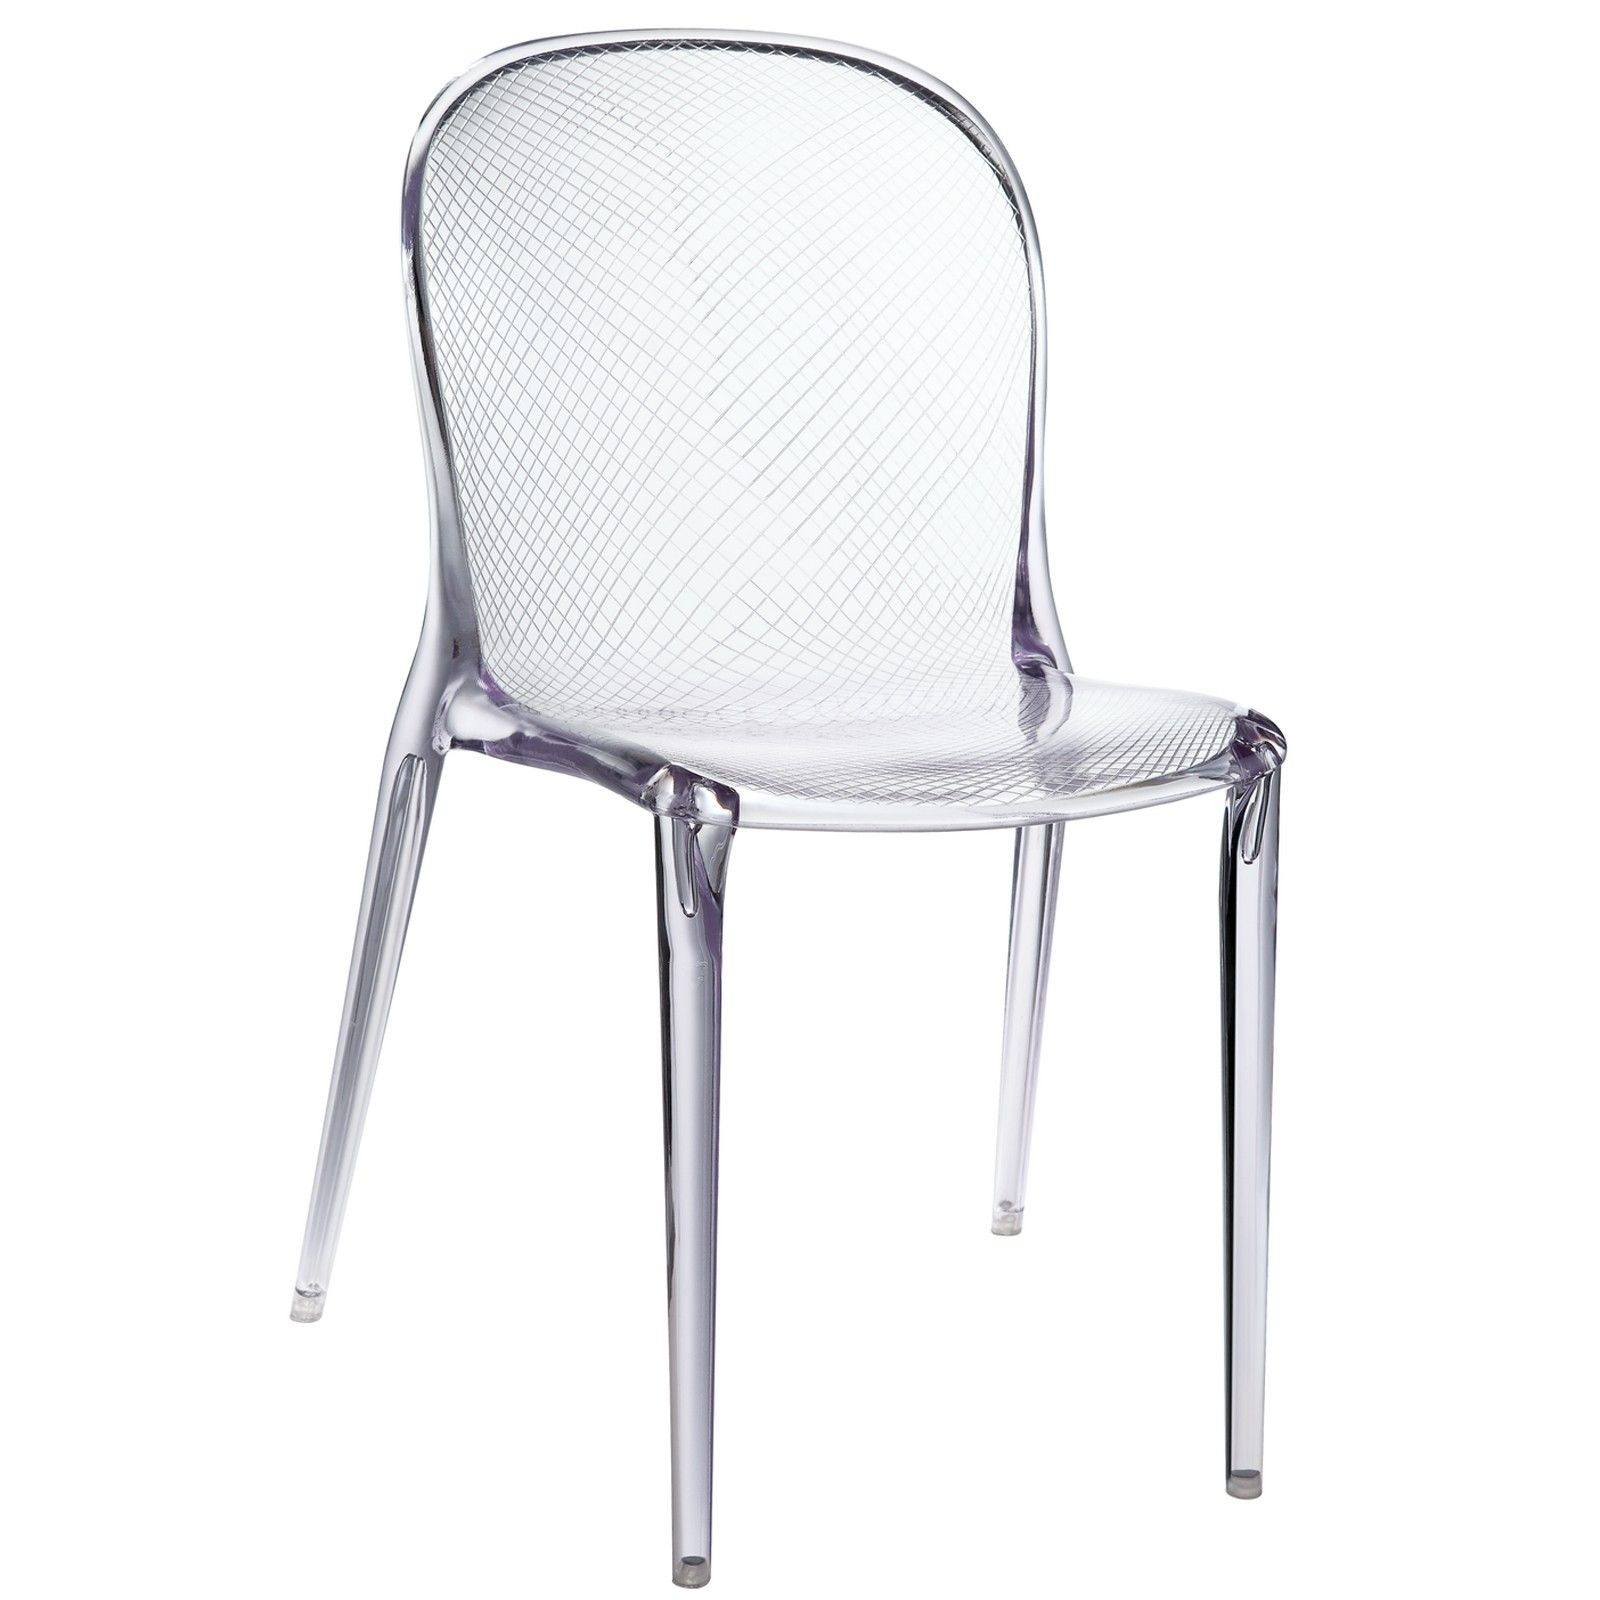 Acrylic dining chairs 20